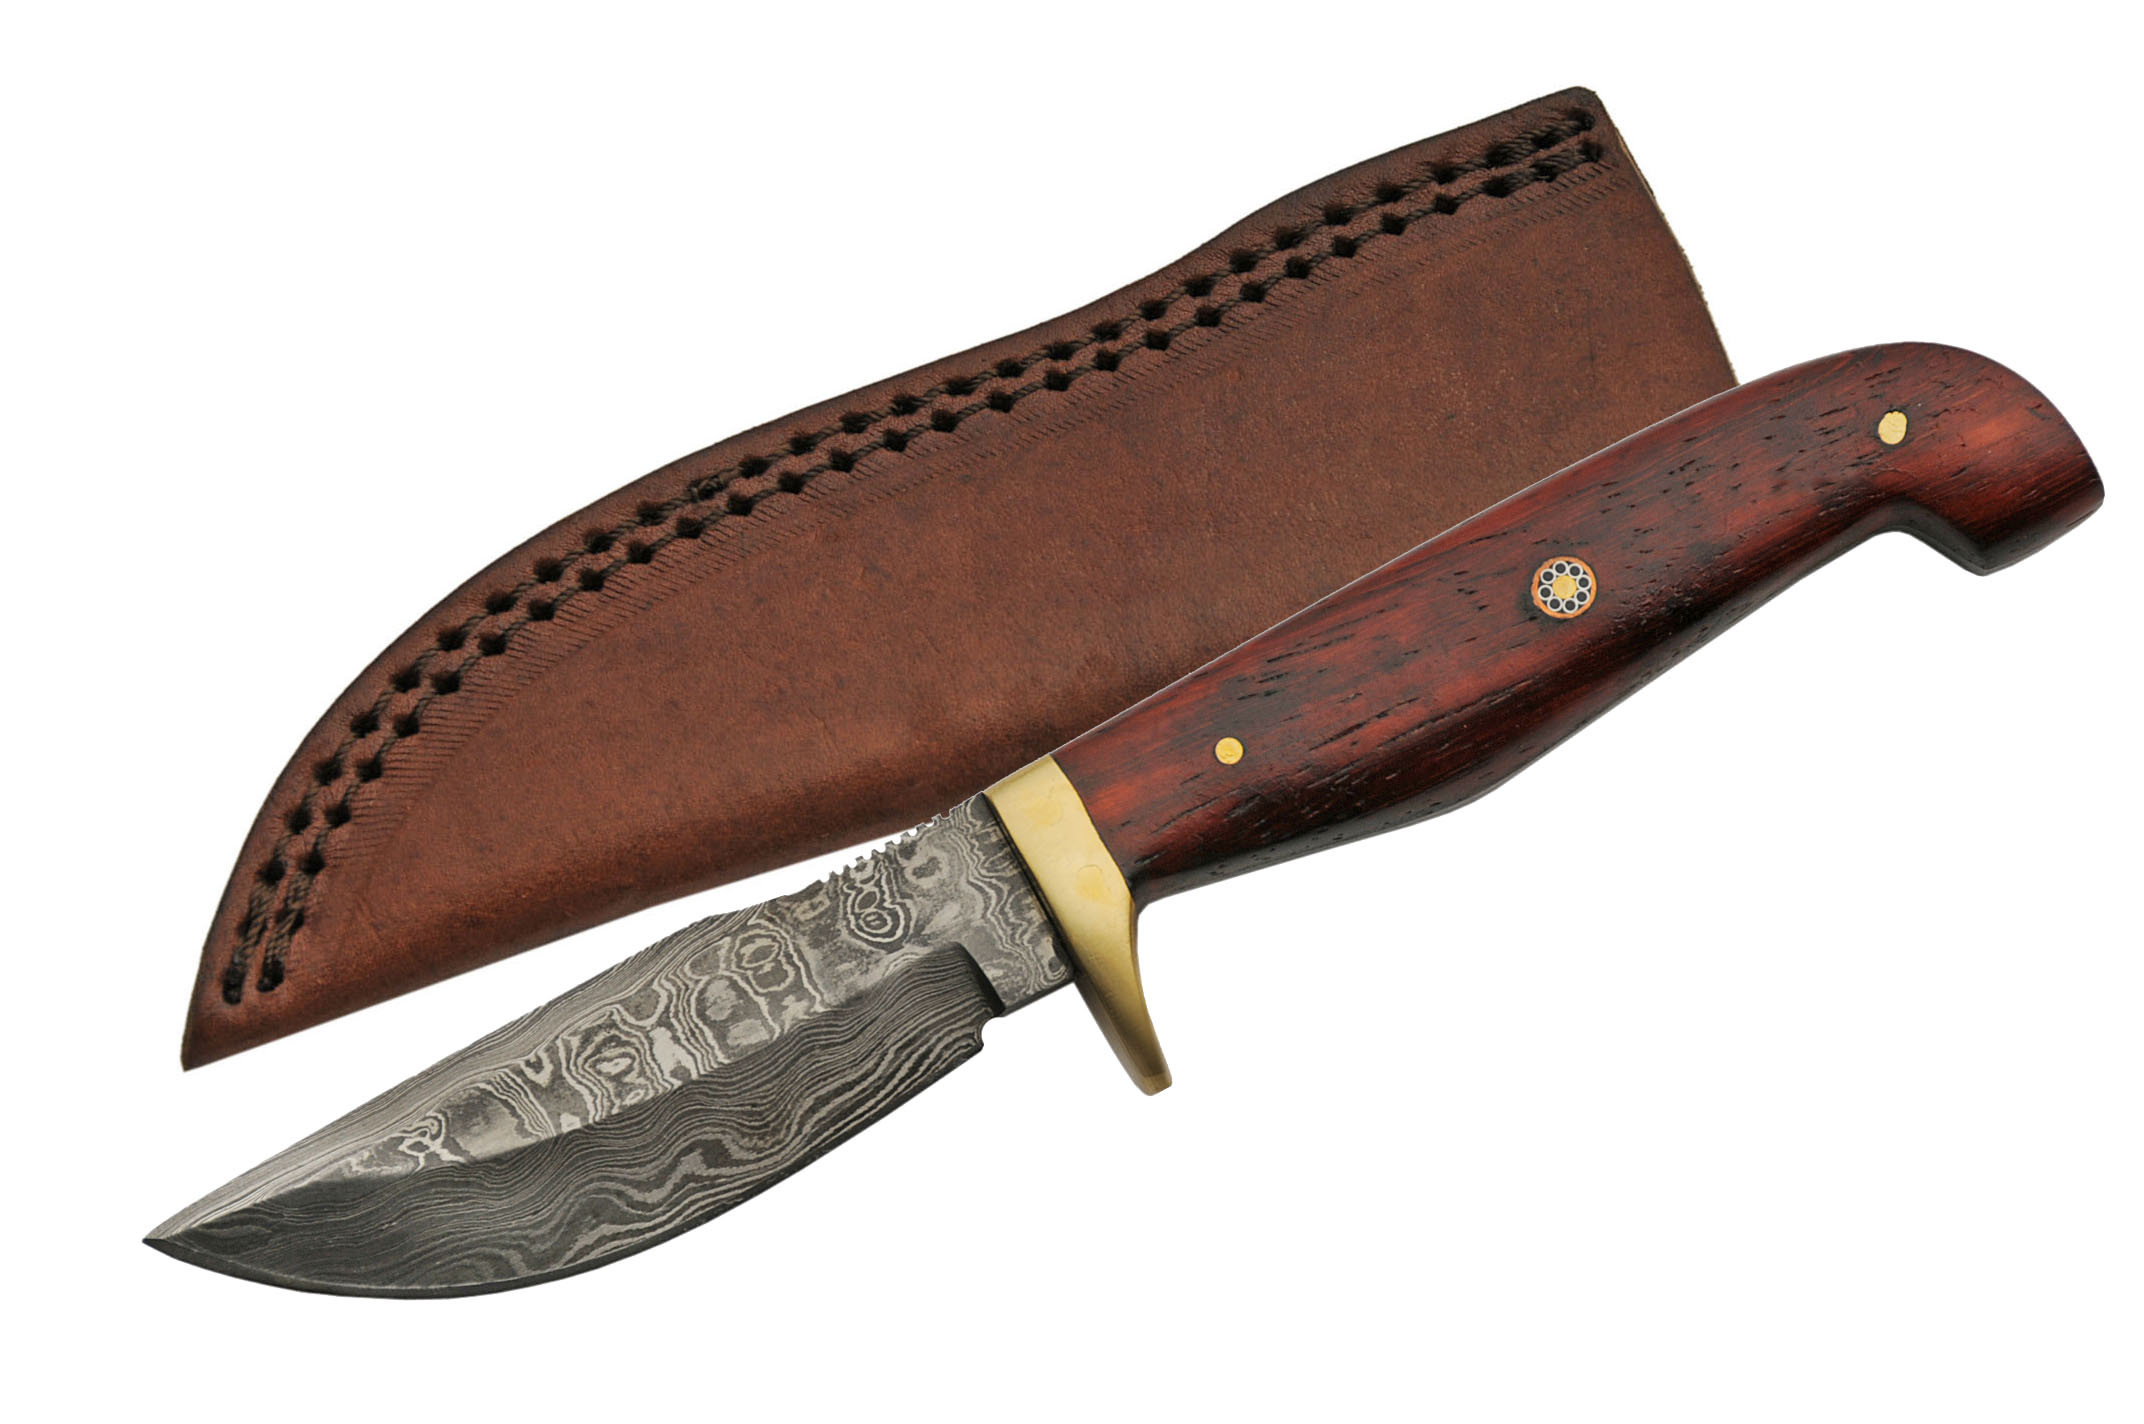 Damascus Steel Hunting Knife 8in. Overall Red Padauk Wood + Leather Sheath